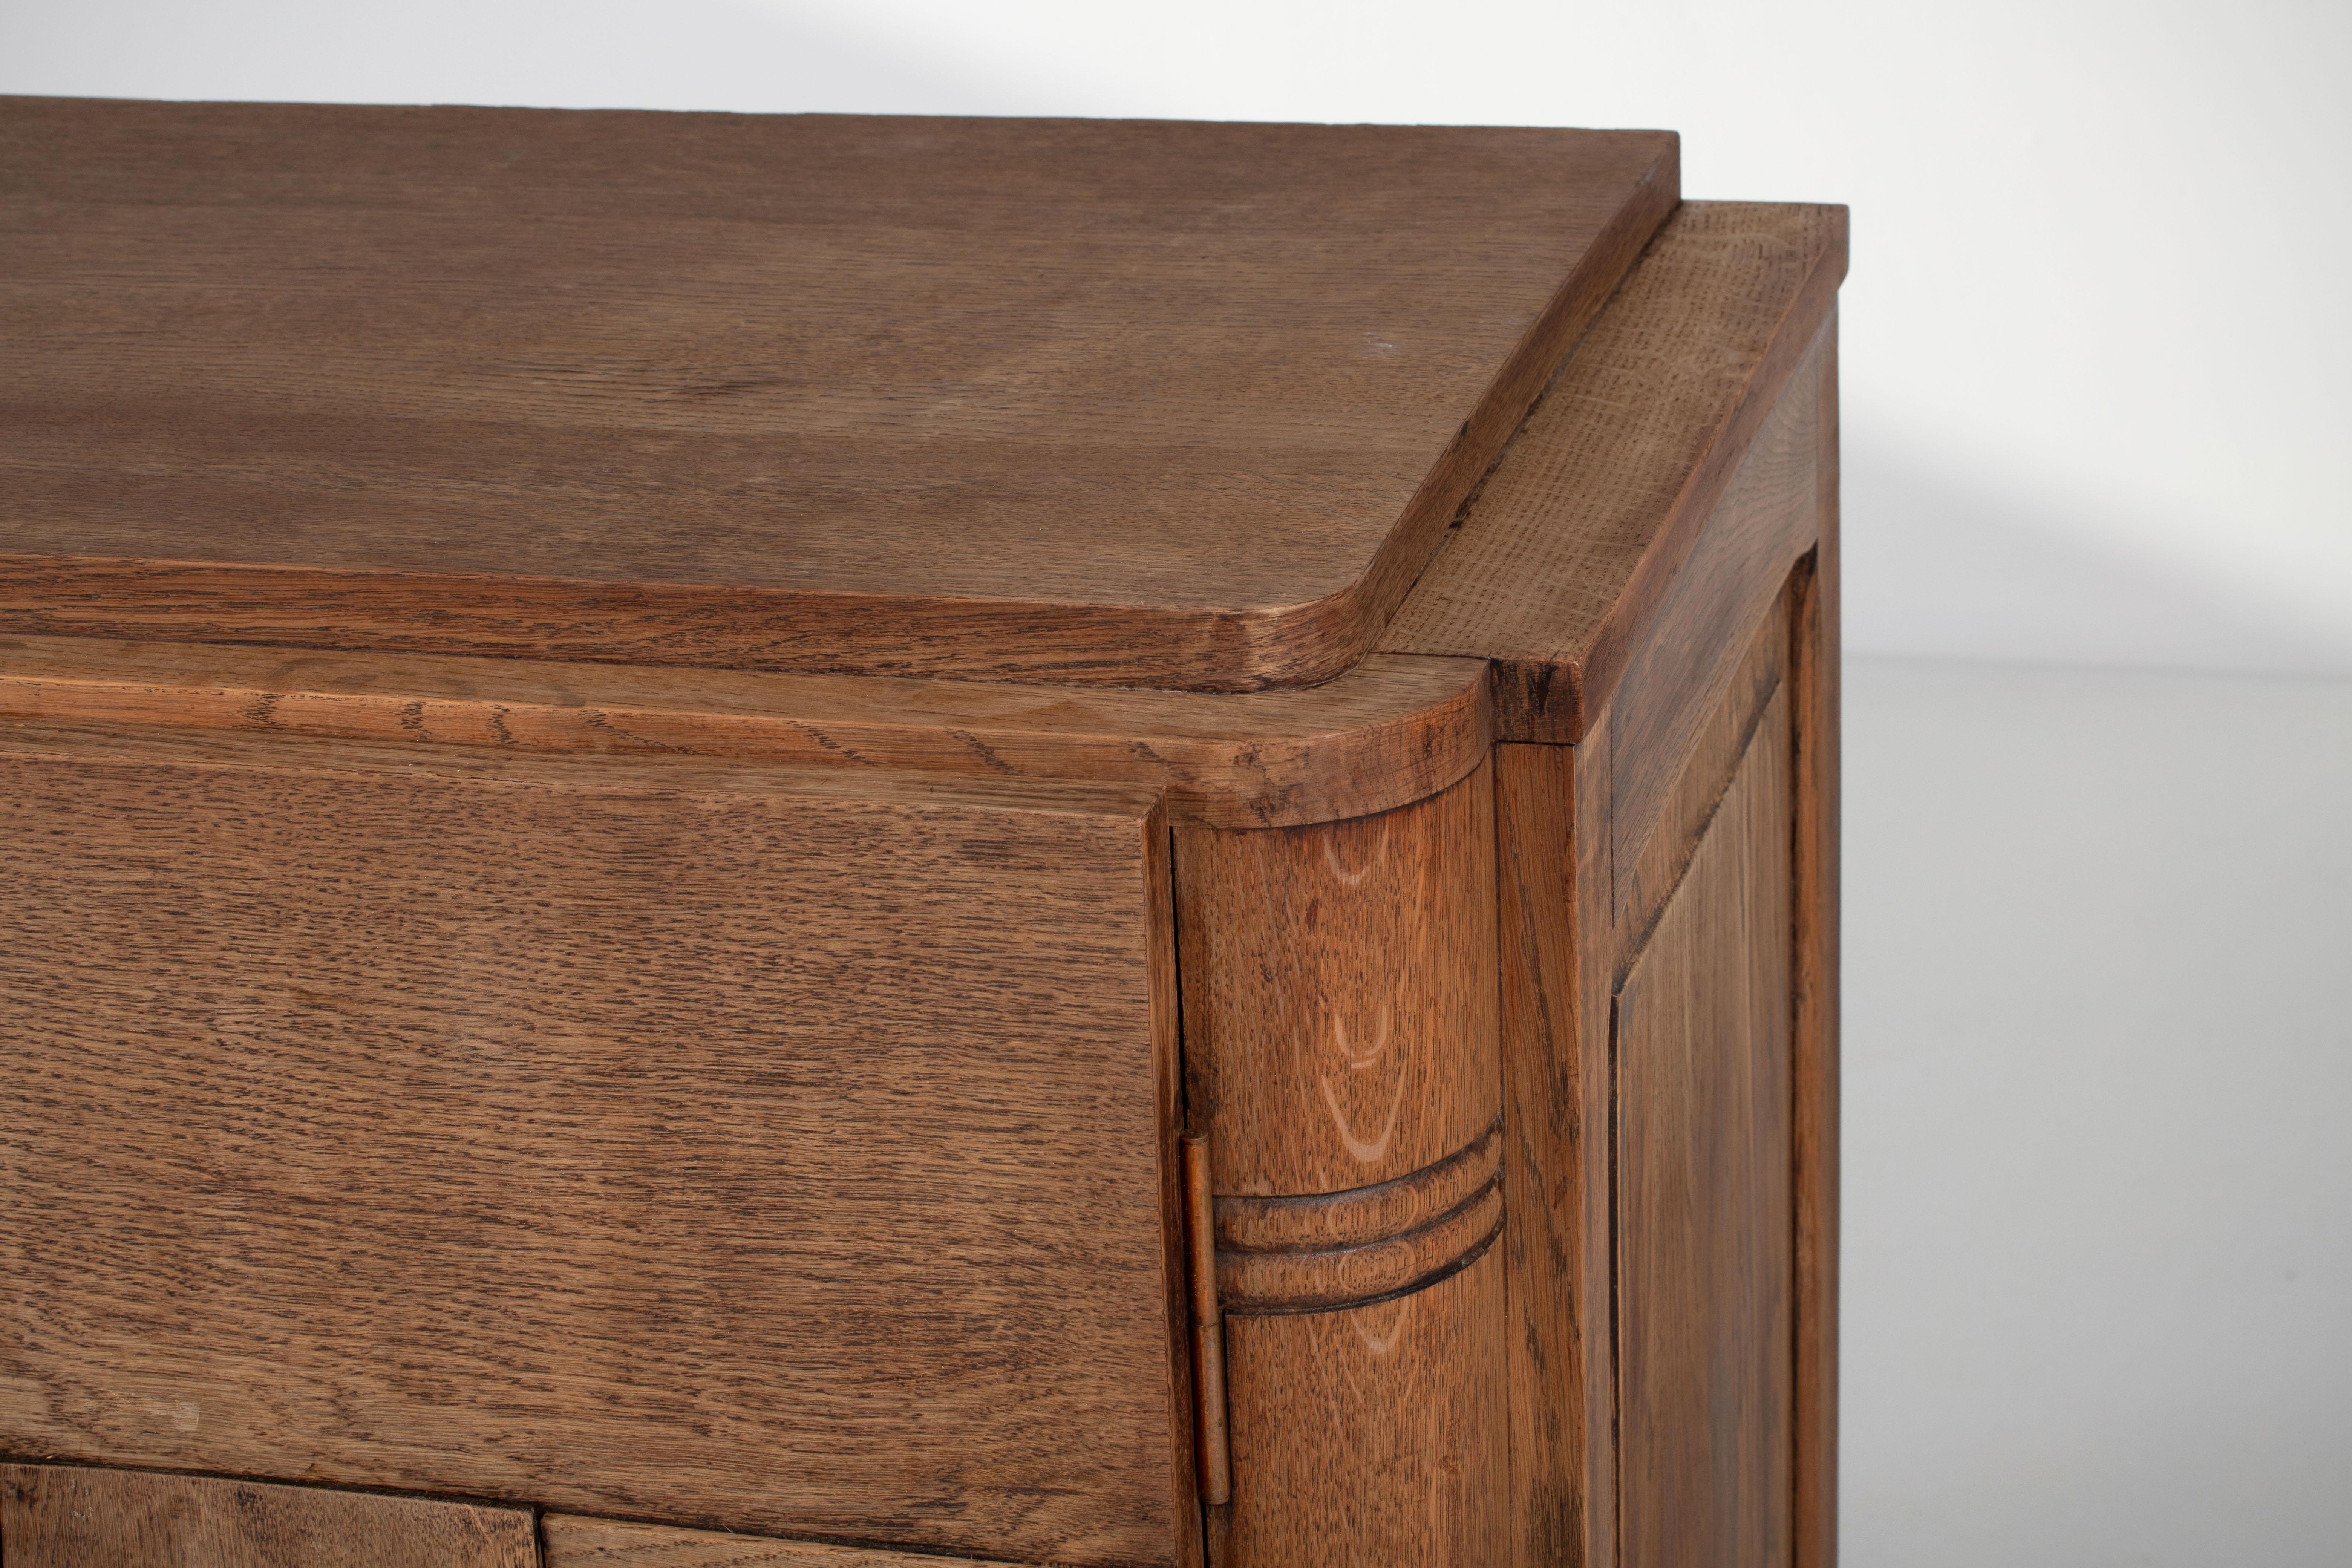 Bleached Solid Oak Credenza with Graphic Details, France, 1940s For Sale 8